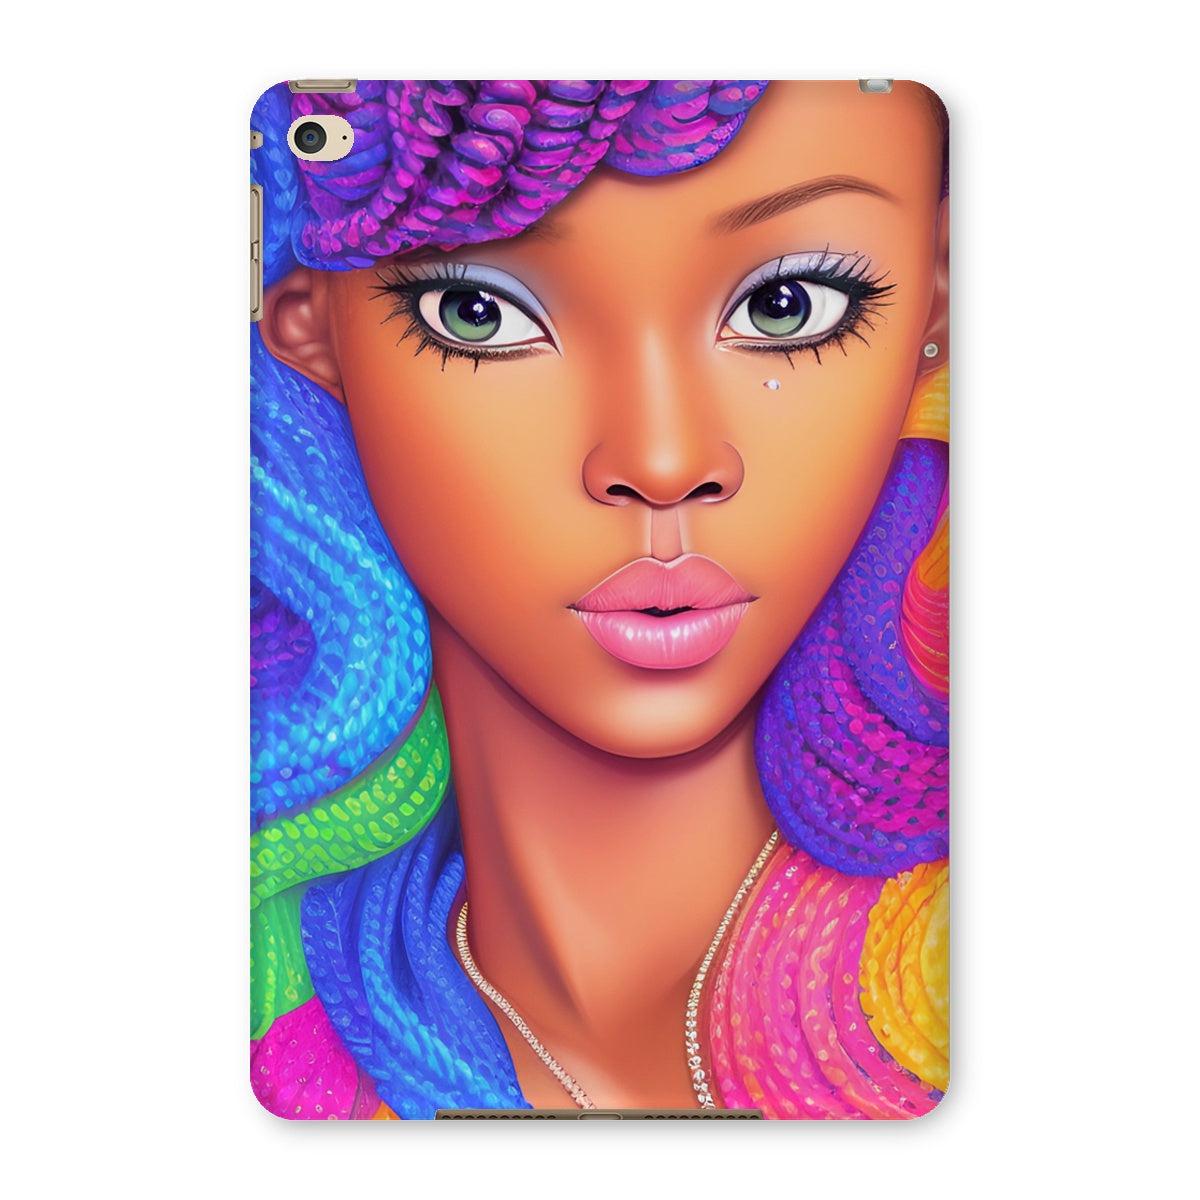 Barbie Braided Tablet Cases